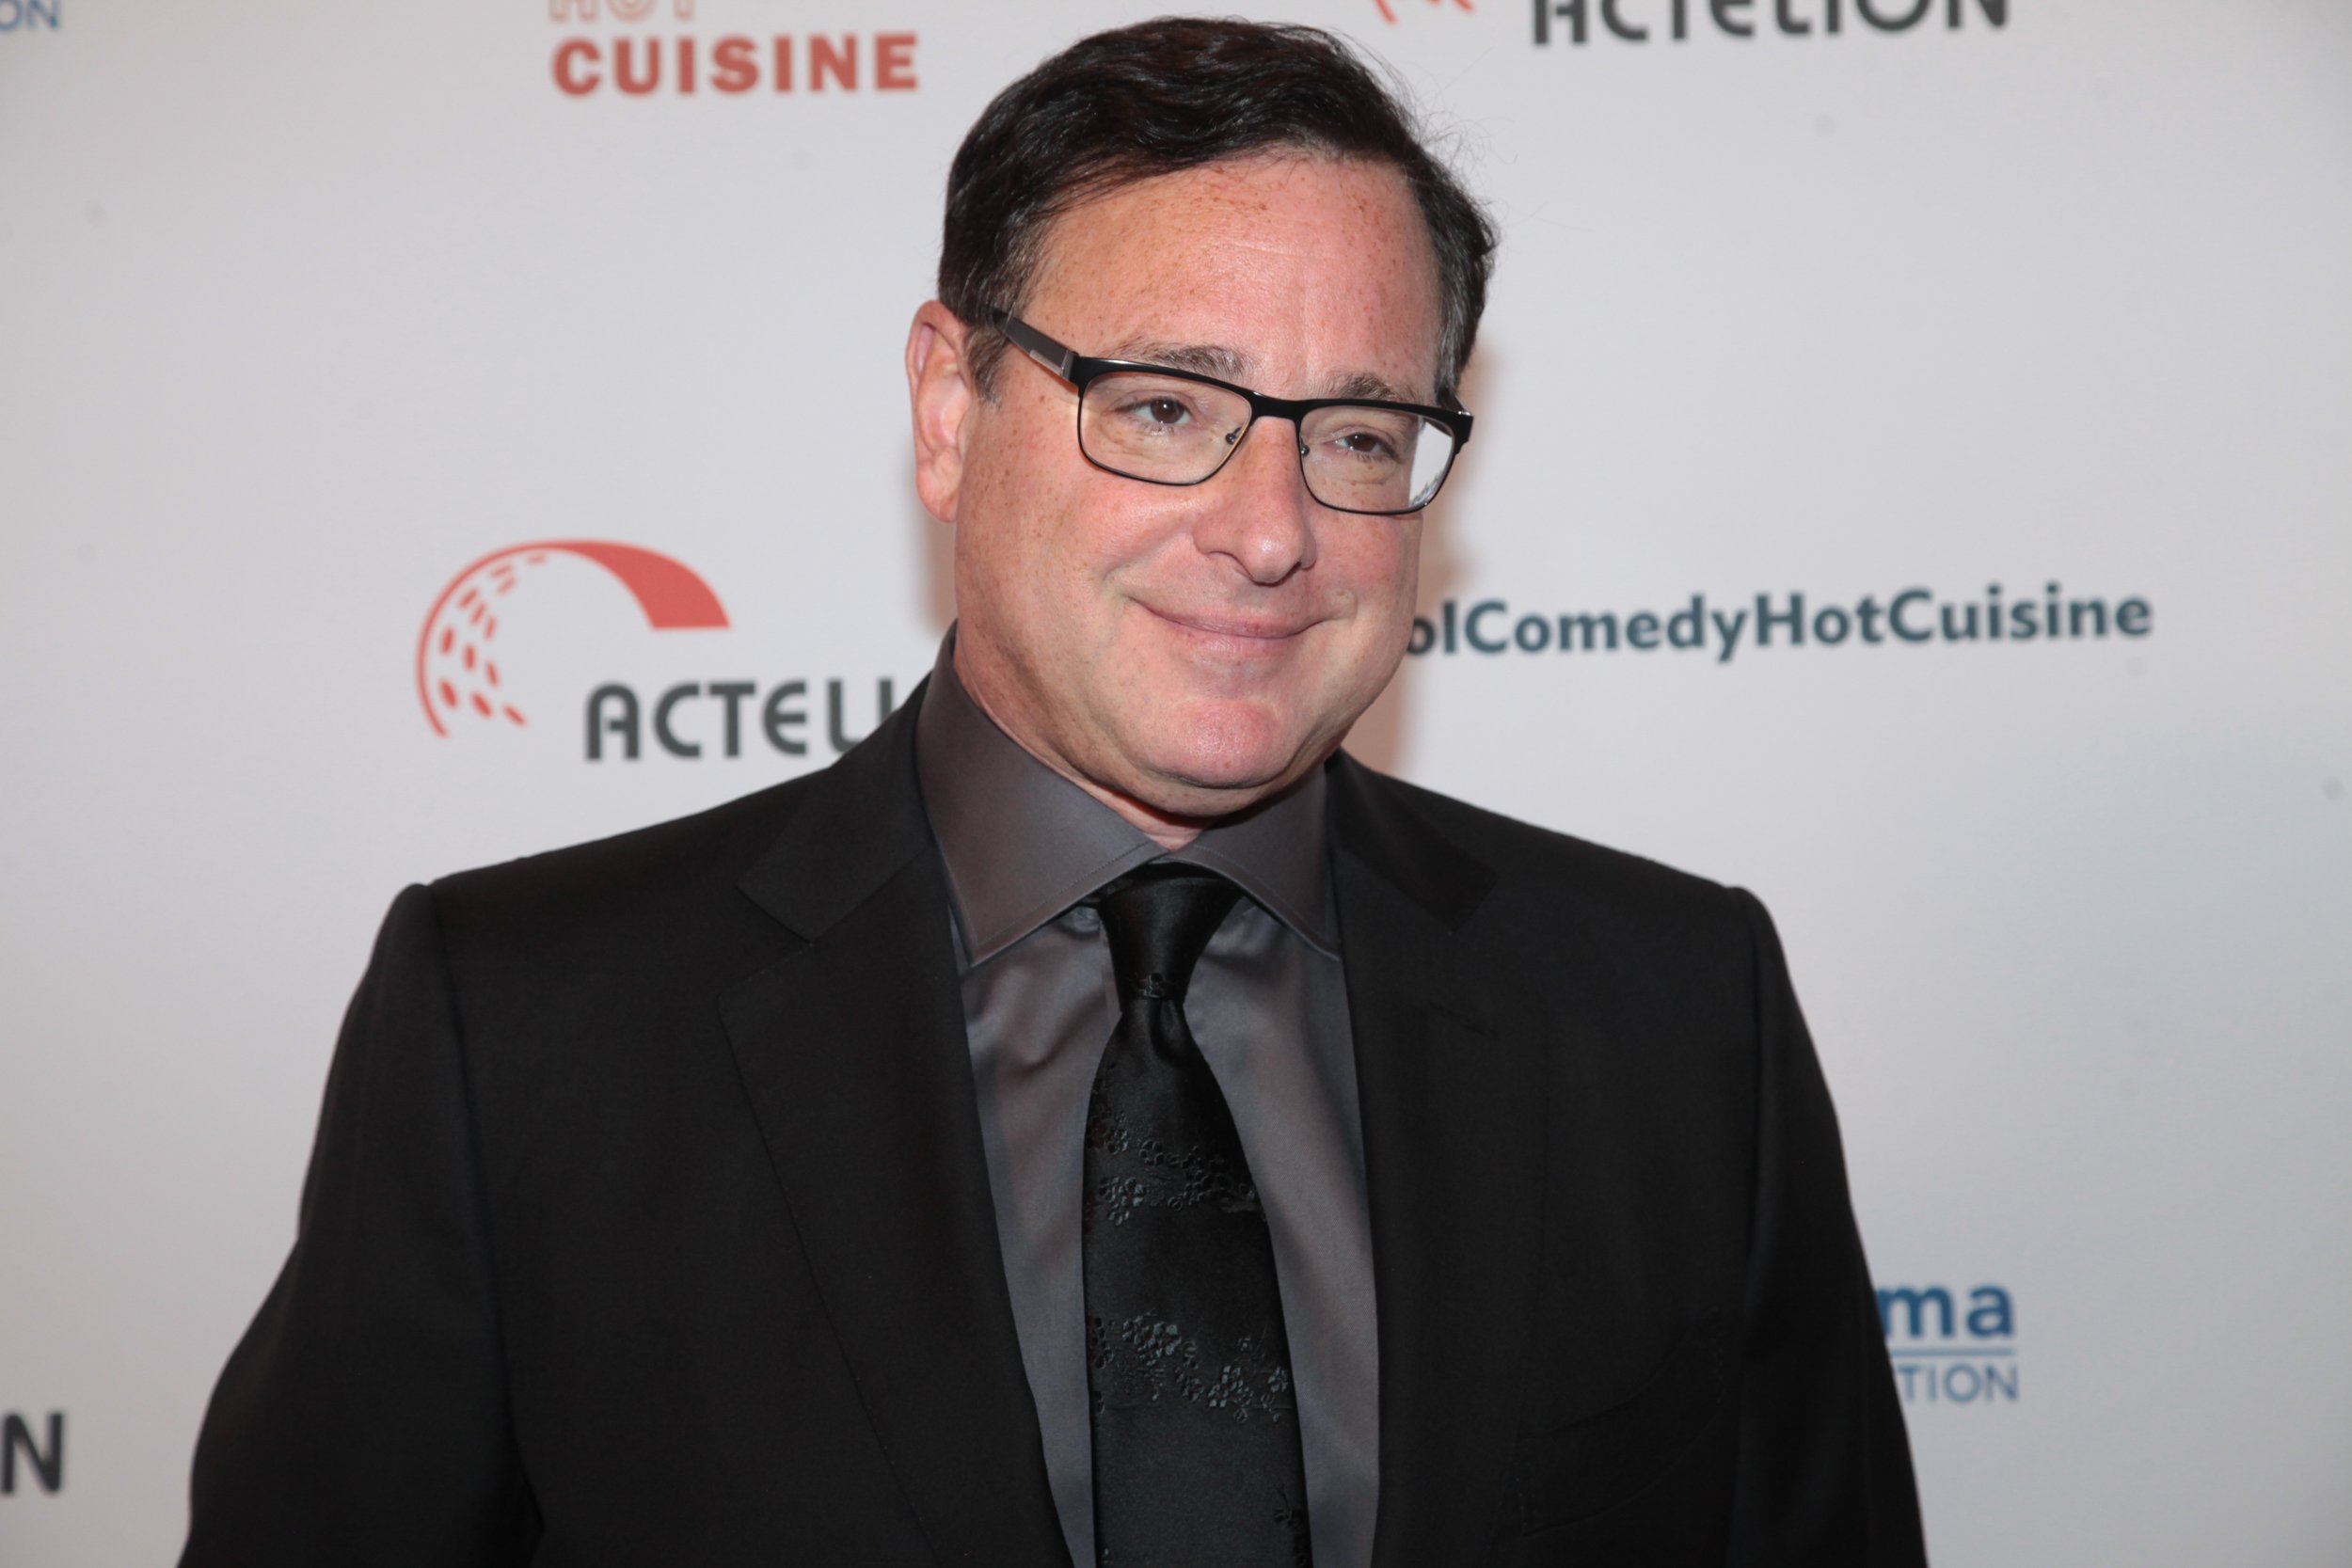 Bob Saget during the 30th Annual Scleroderma Benefit at the Beverly Wilshire Four Seasons Hotel on June 16, 2017, in Beverly Hills, California. | Source: Getty Images